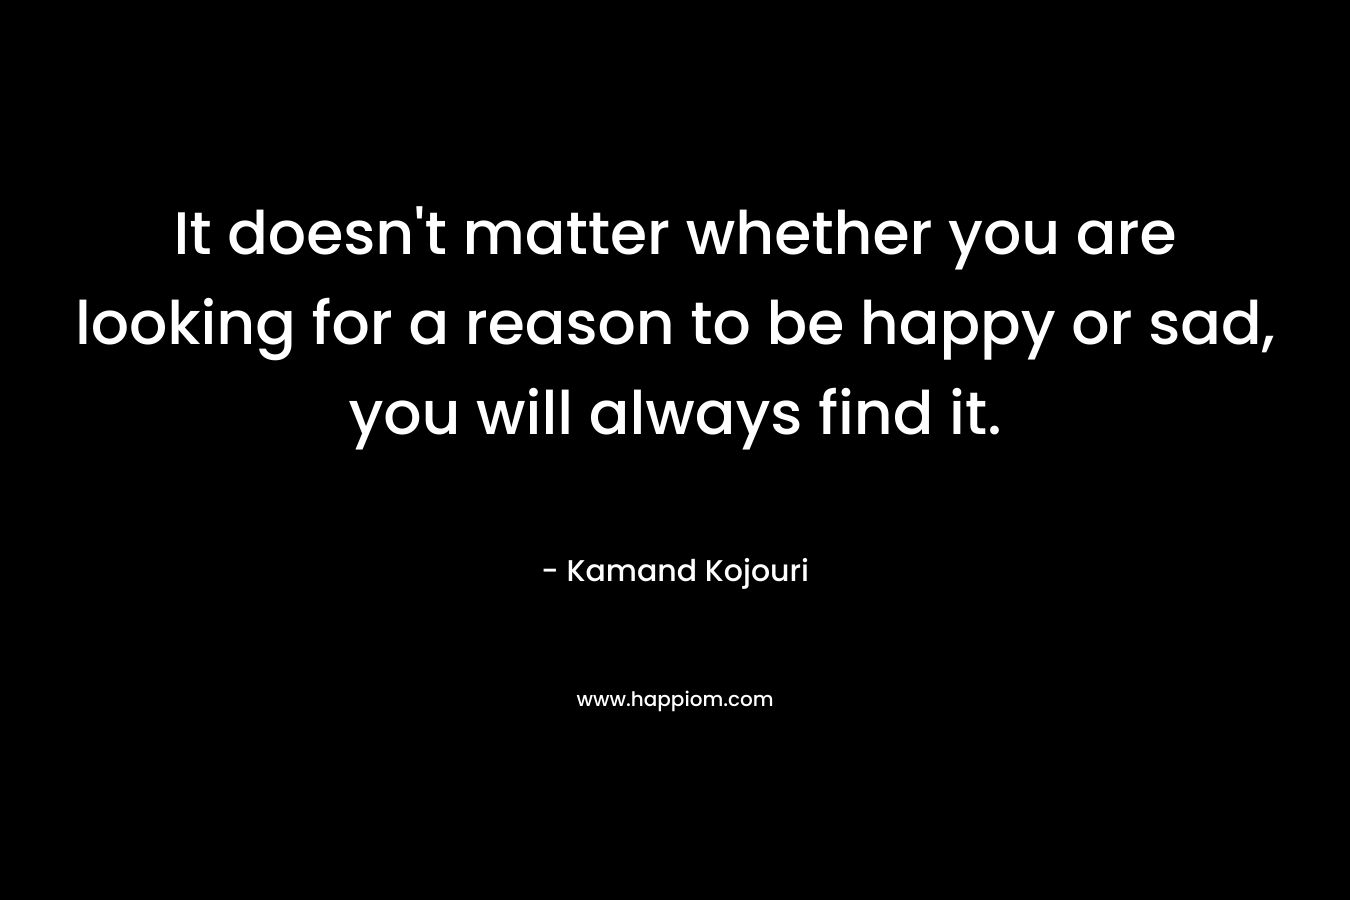 It doesn't matter whether you are looking for a reason to be happy or sad, you will always find it.